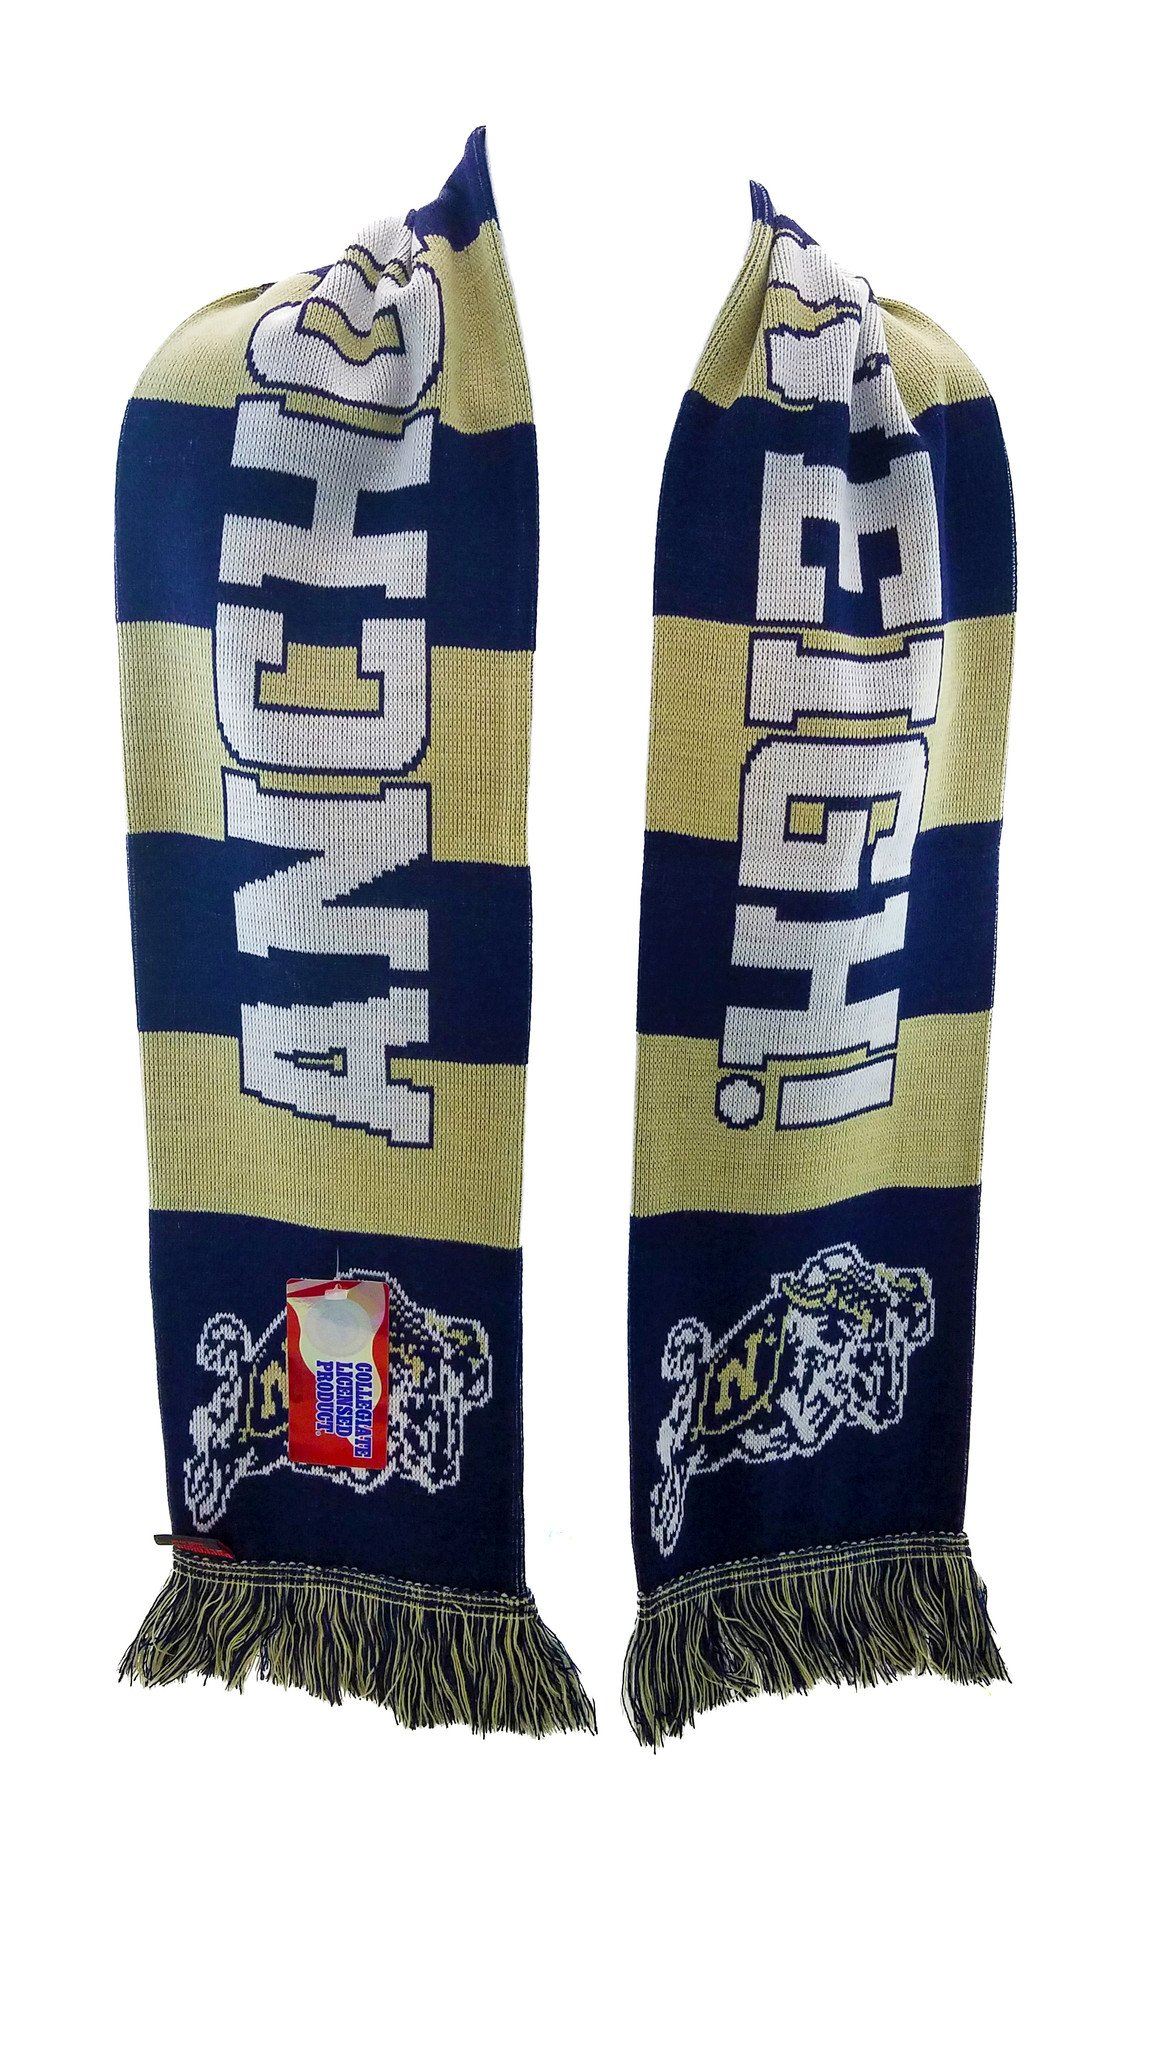 NAVY SCARF - Blue and Gold Bars - Ruffneck Scarves - 2